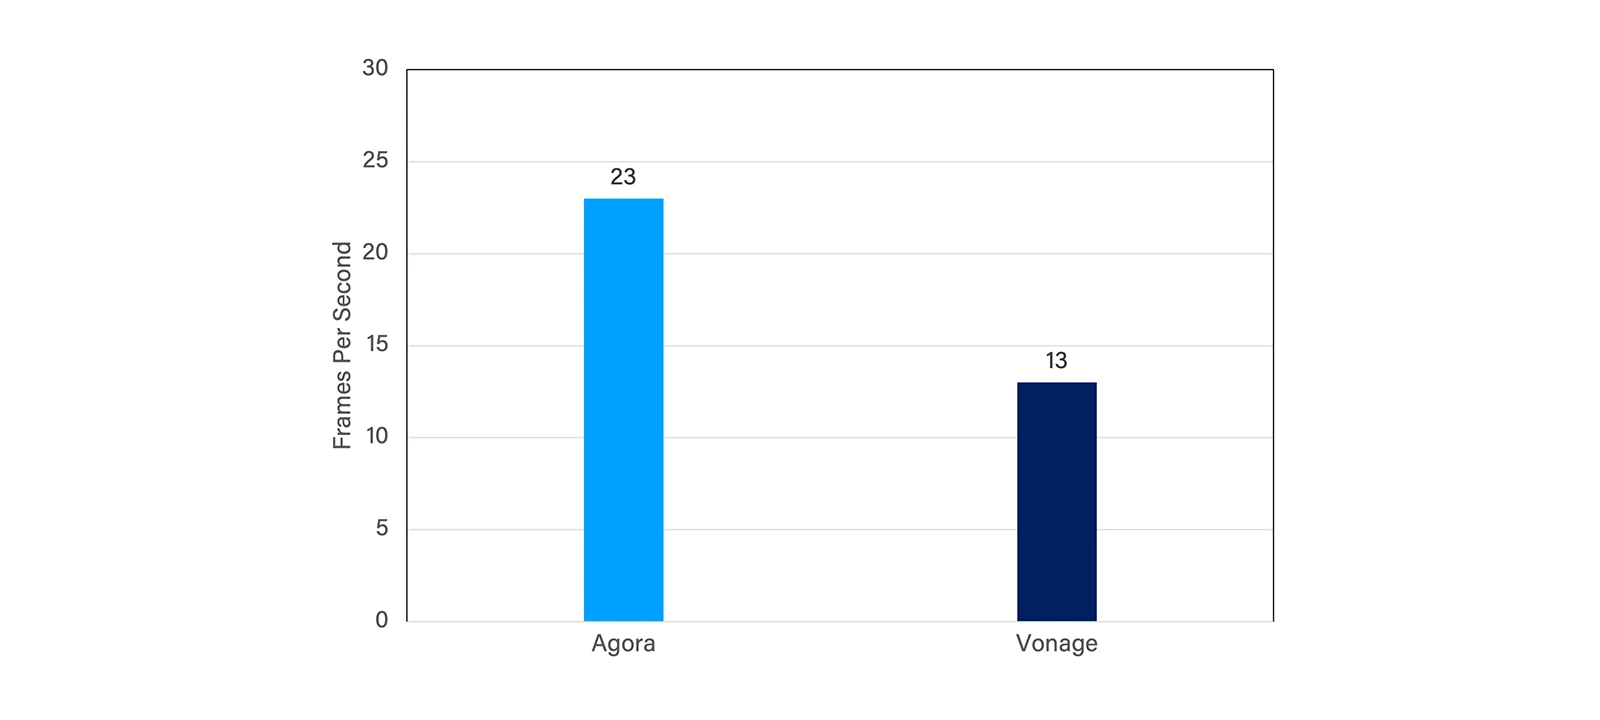 Figure 2: FPS comparison for Agora and Vonage with network having uplink packet loss of 25%.